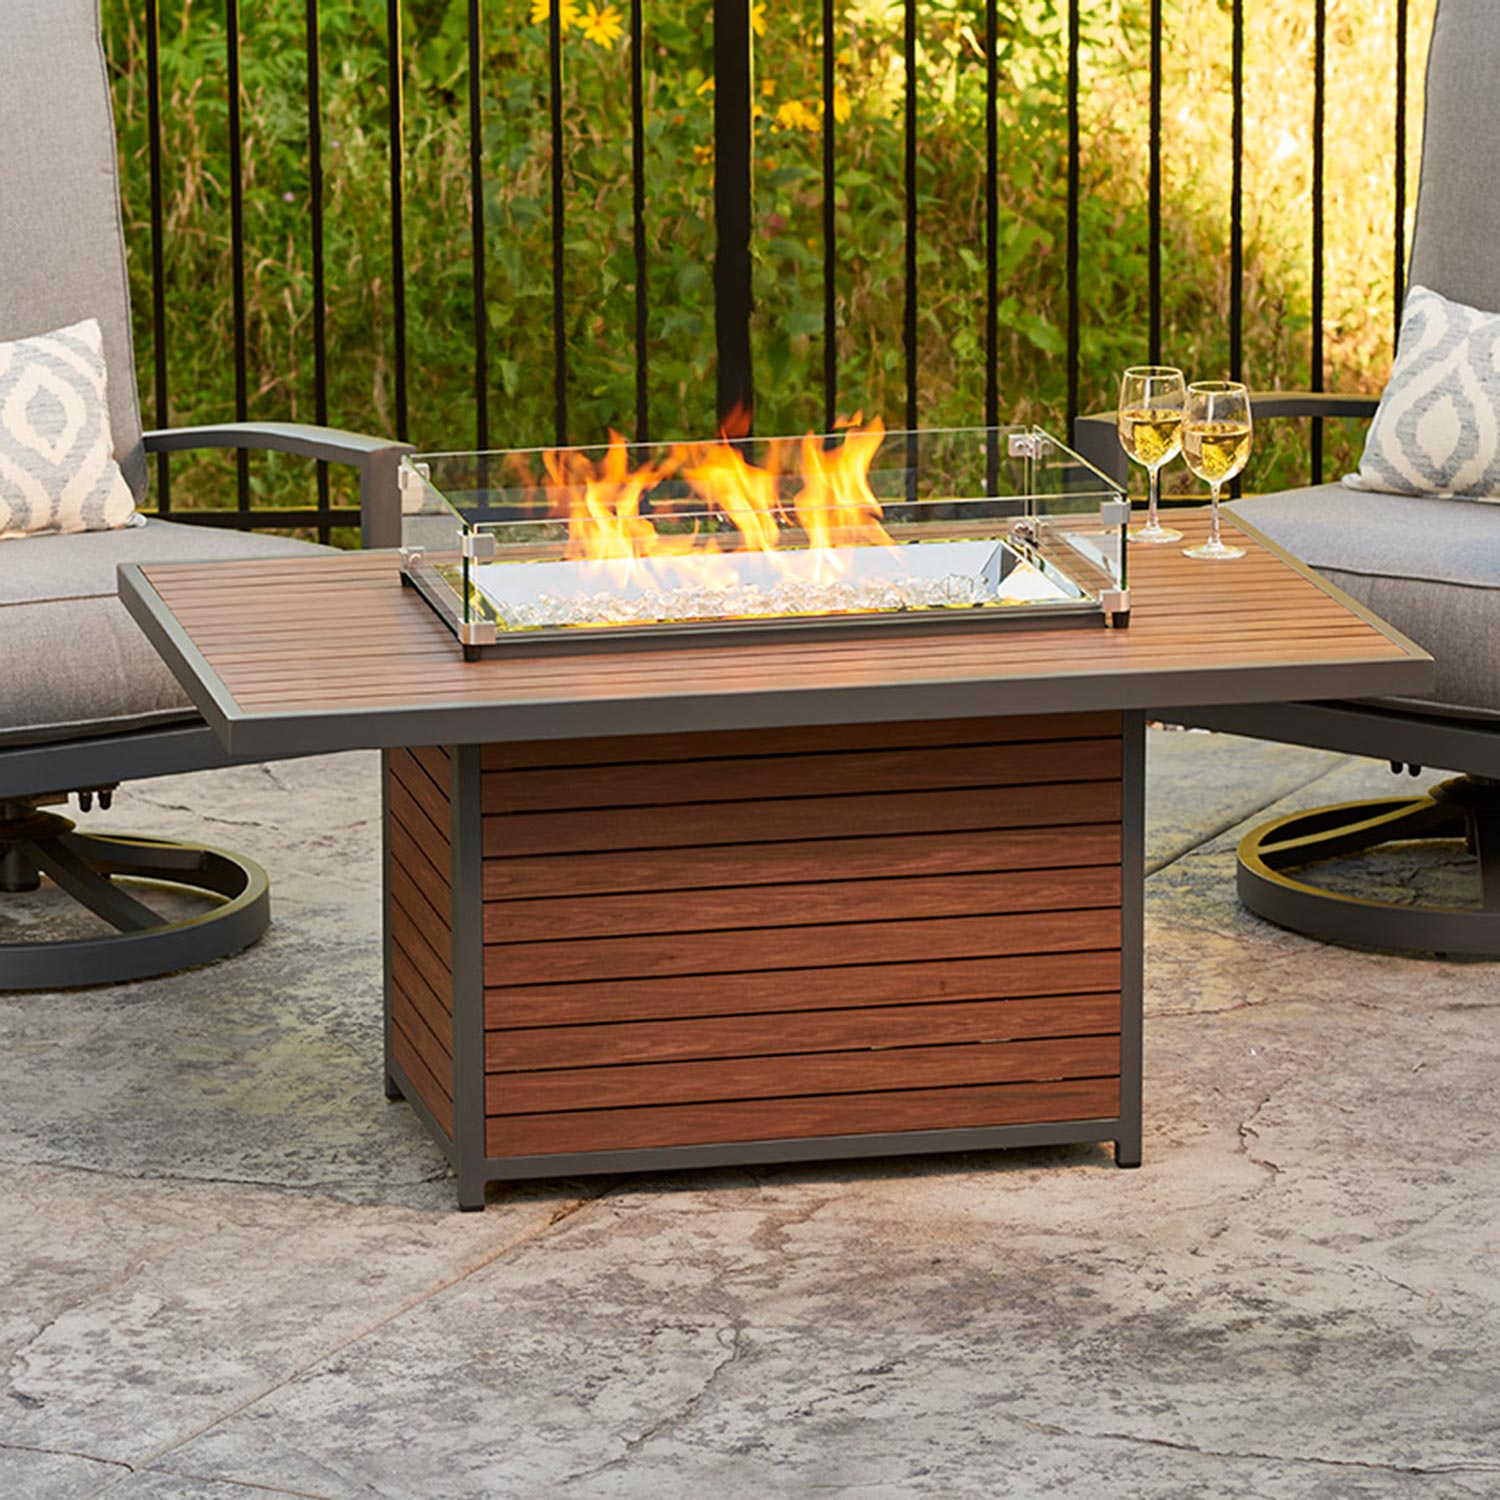 Kenwood Rectangular Chat Height Fire Pit Table w/ Glass Guard